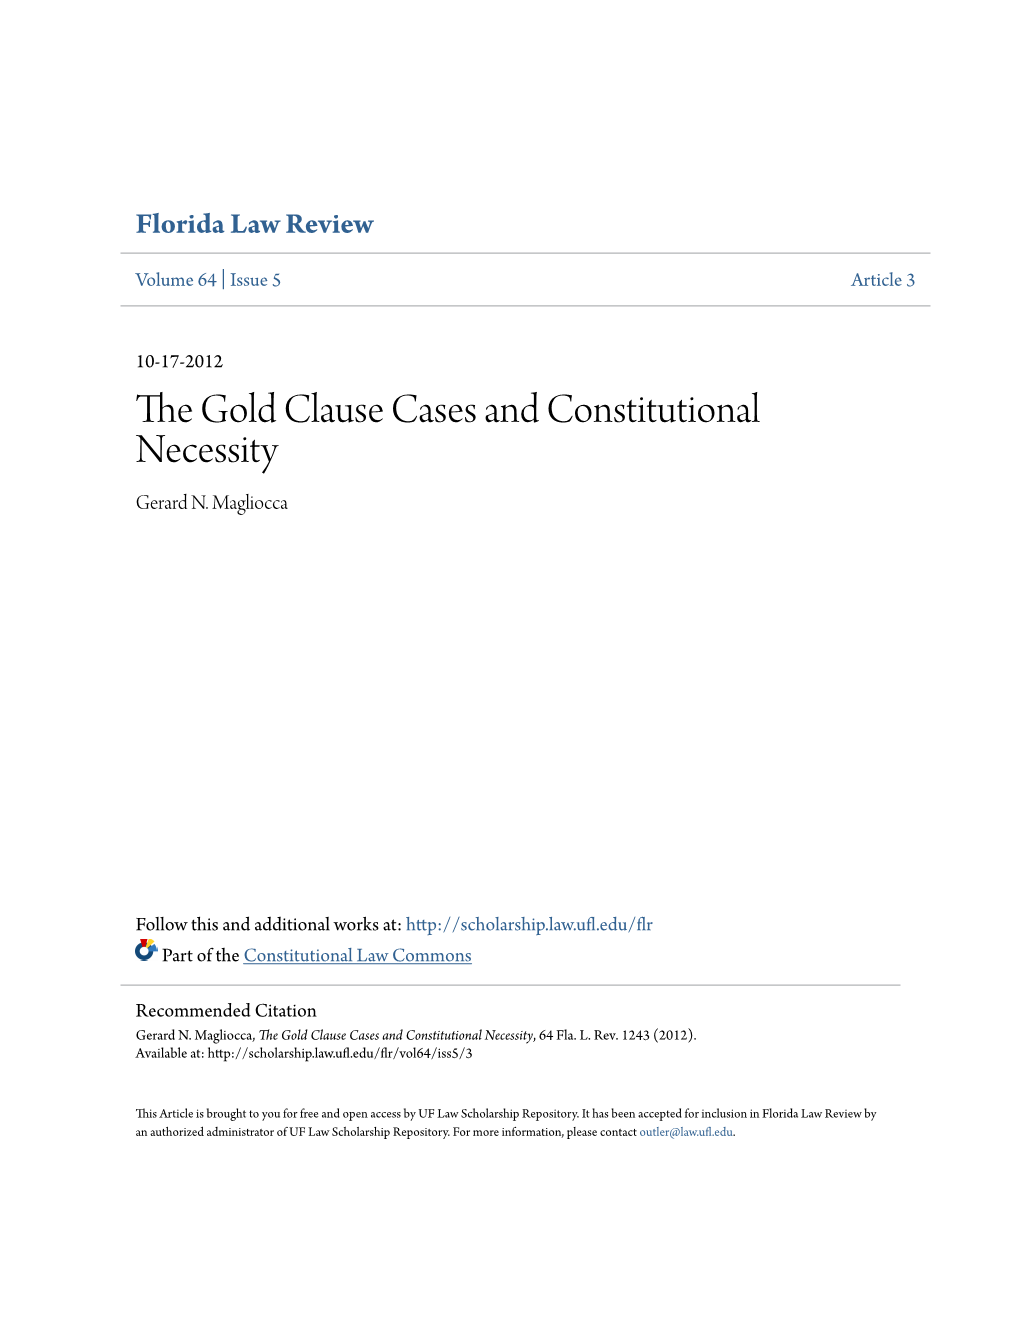 The Gold Clause Cases and Constitutional Necessity, 64 Fla